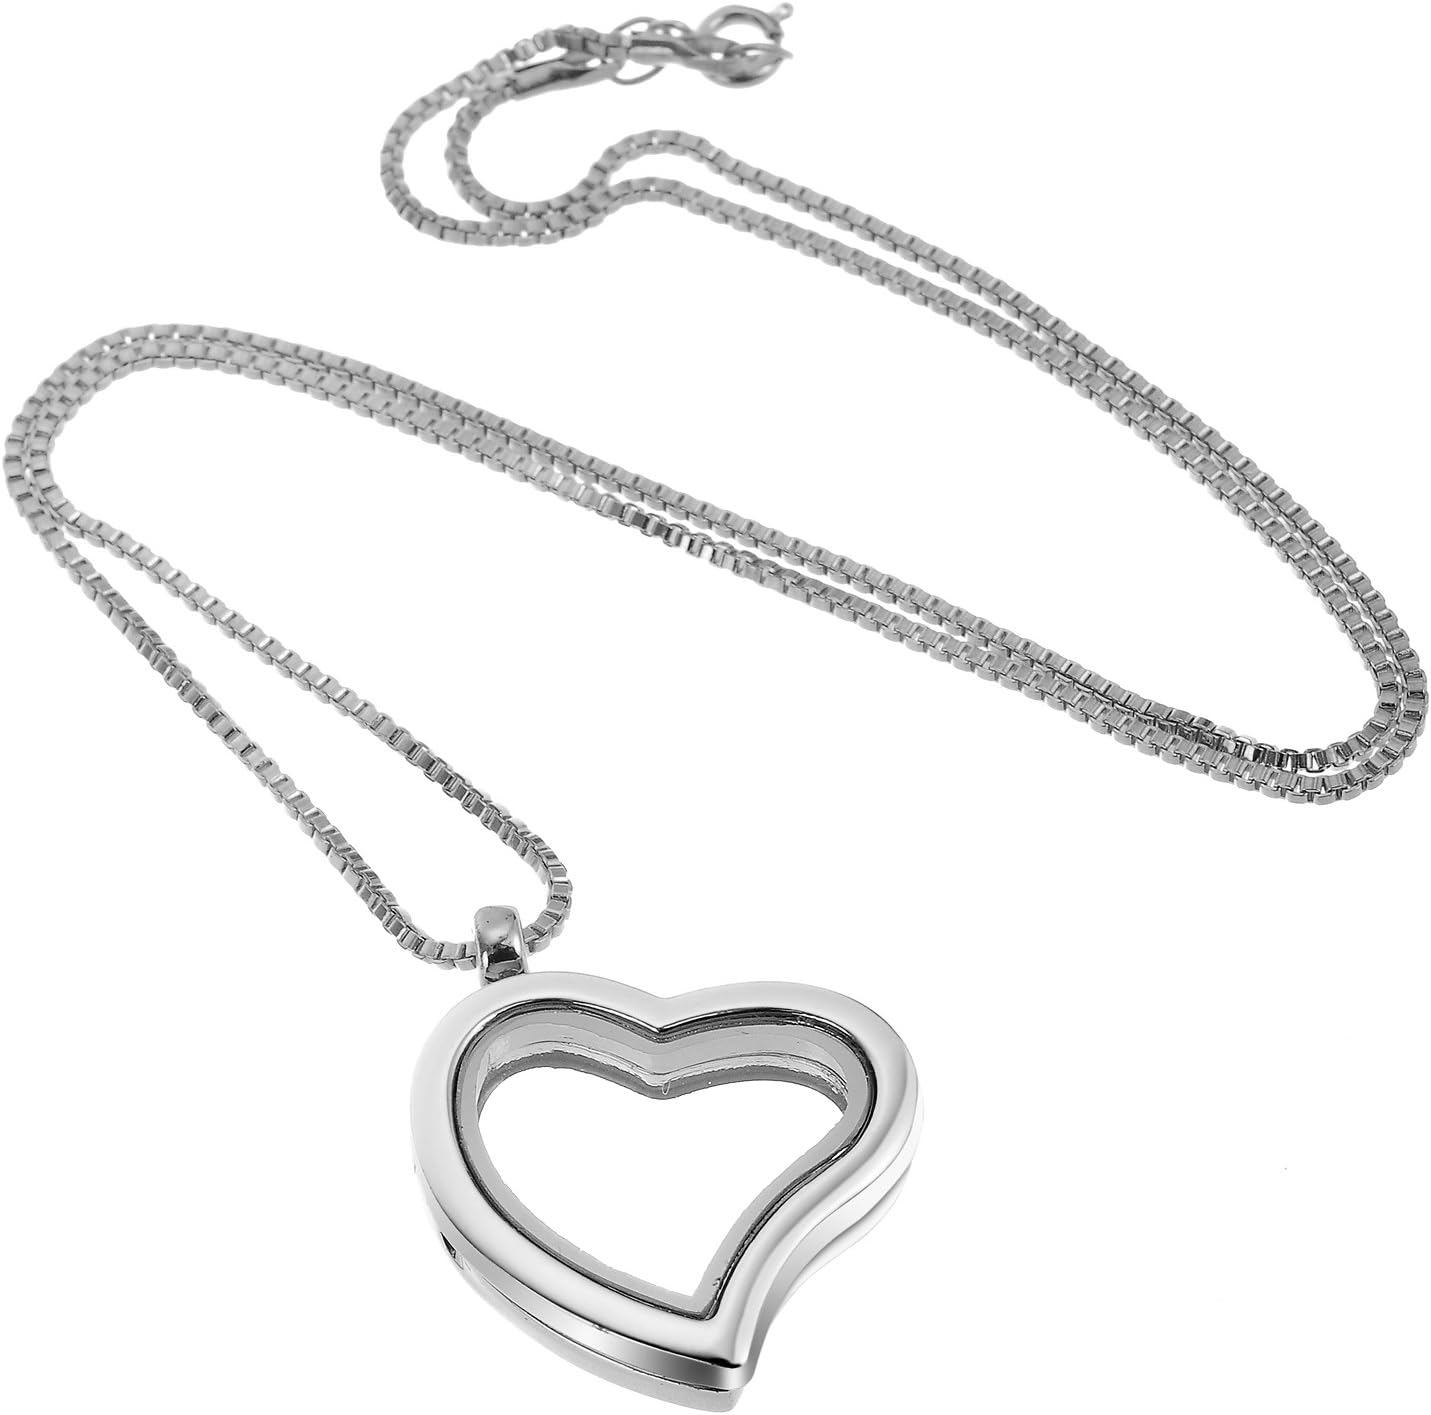  LANCHARMED 925 Sterling Silver Necklace Layering